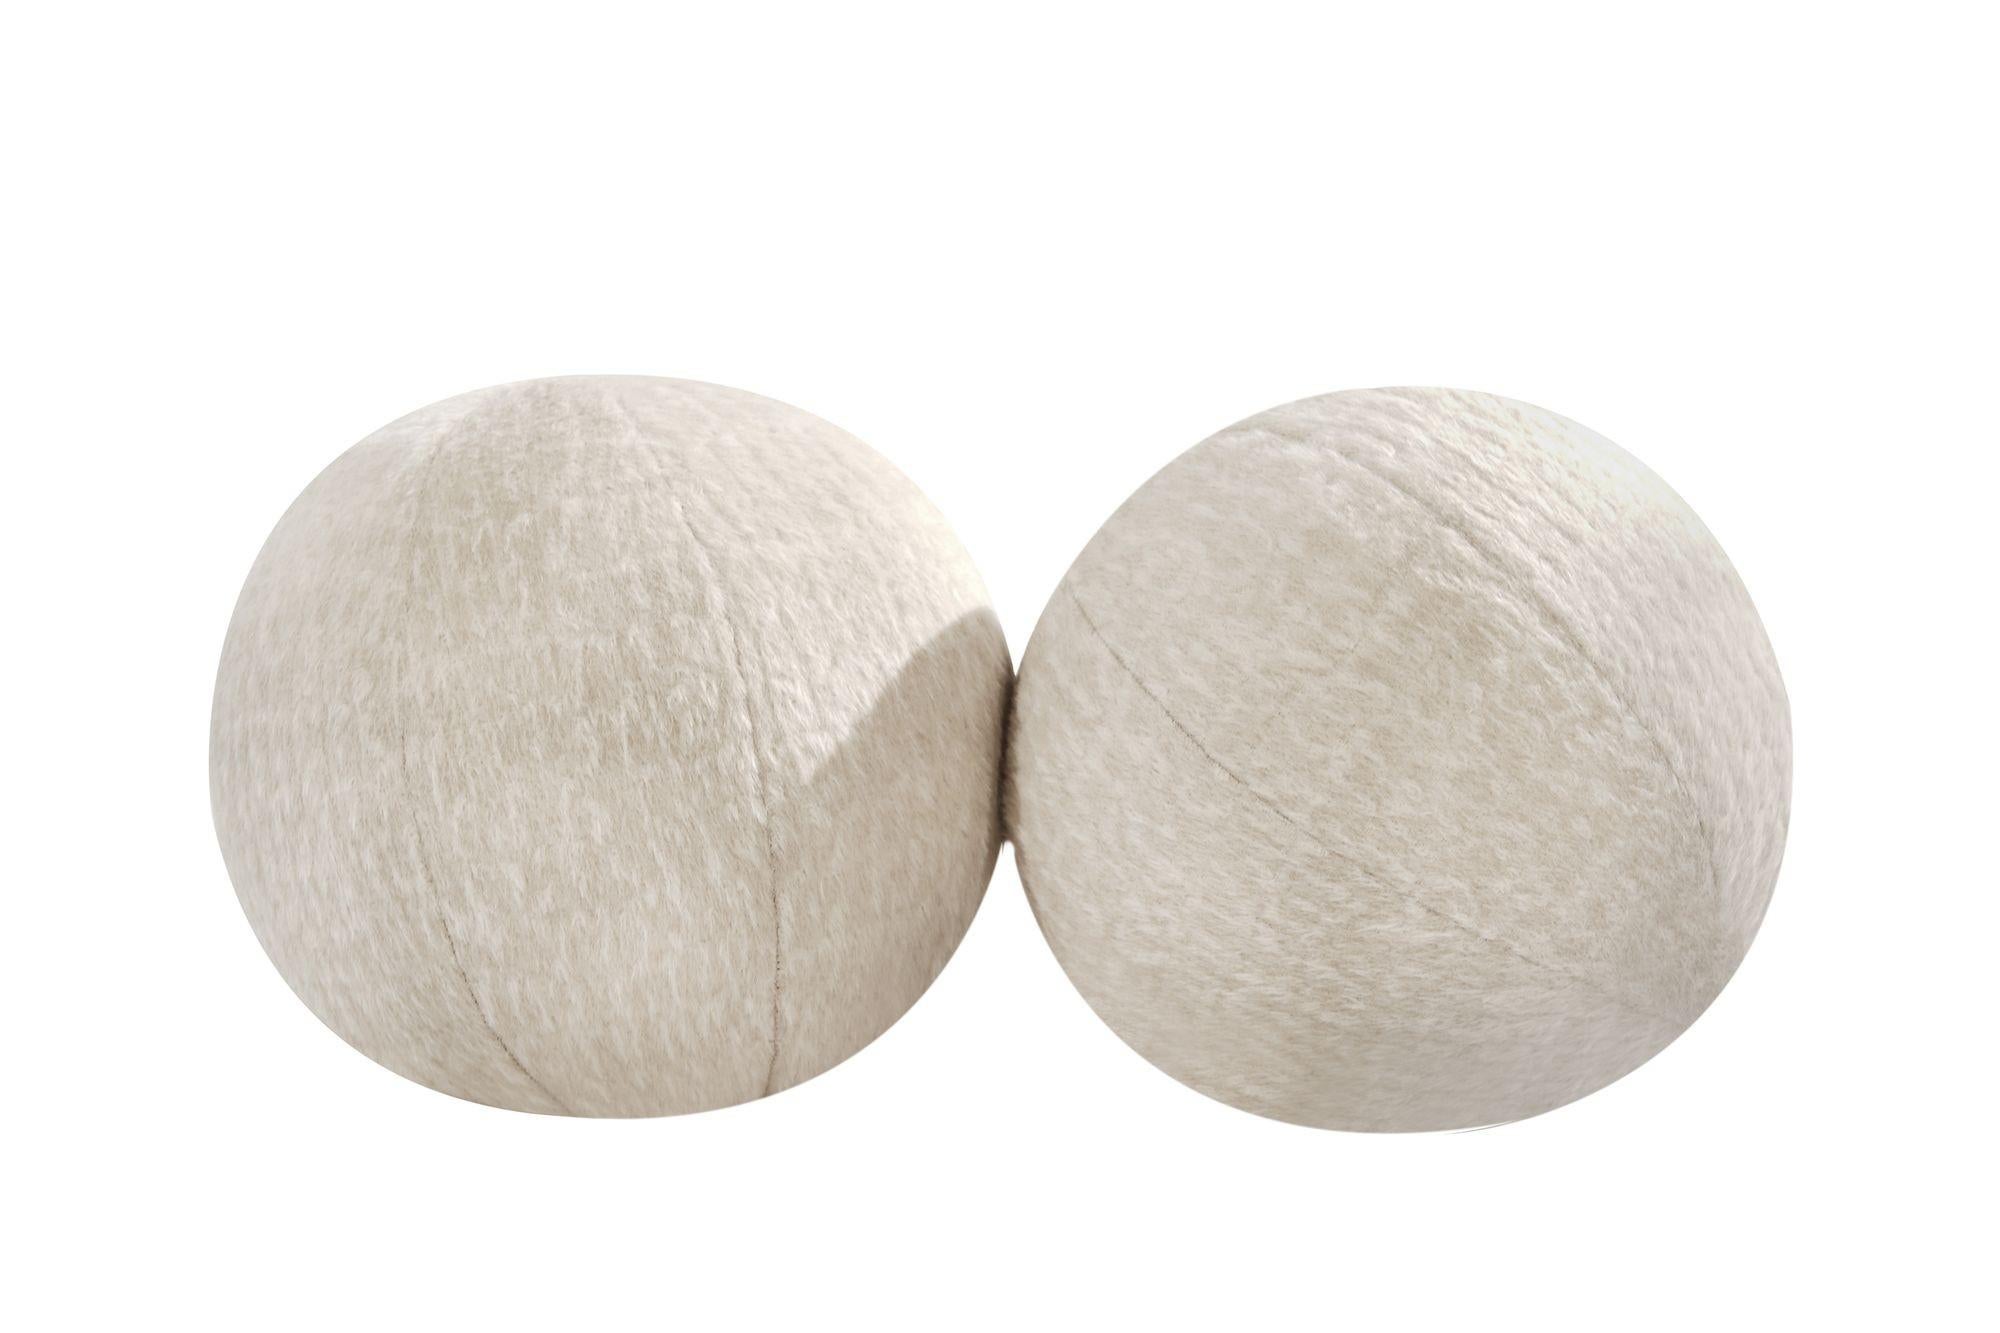 The ORB Pillow is meticulously crafted to provide both aesthetic appeal and exceptional comfort.
 
Designed as a calming take on geometric trends, the ORB Pillow effortlessly combines elegance and functionality. Its circular shape serves as a